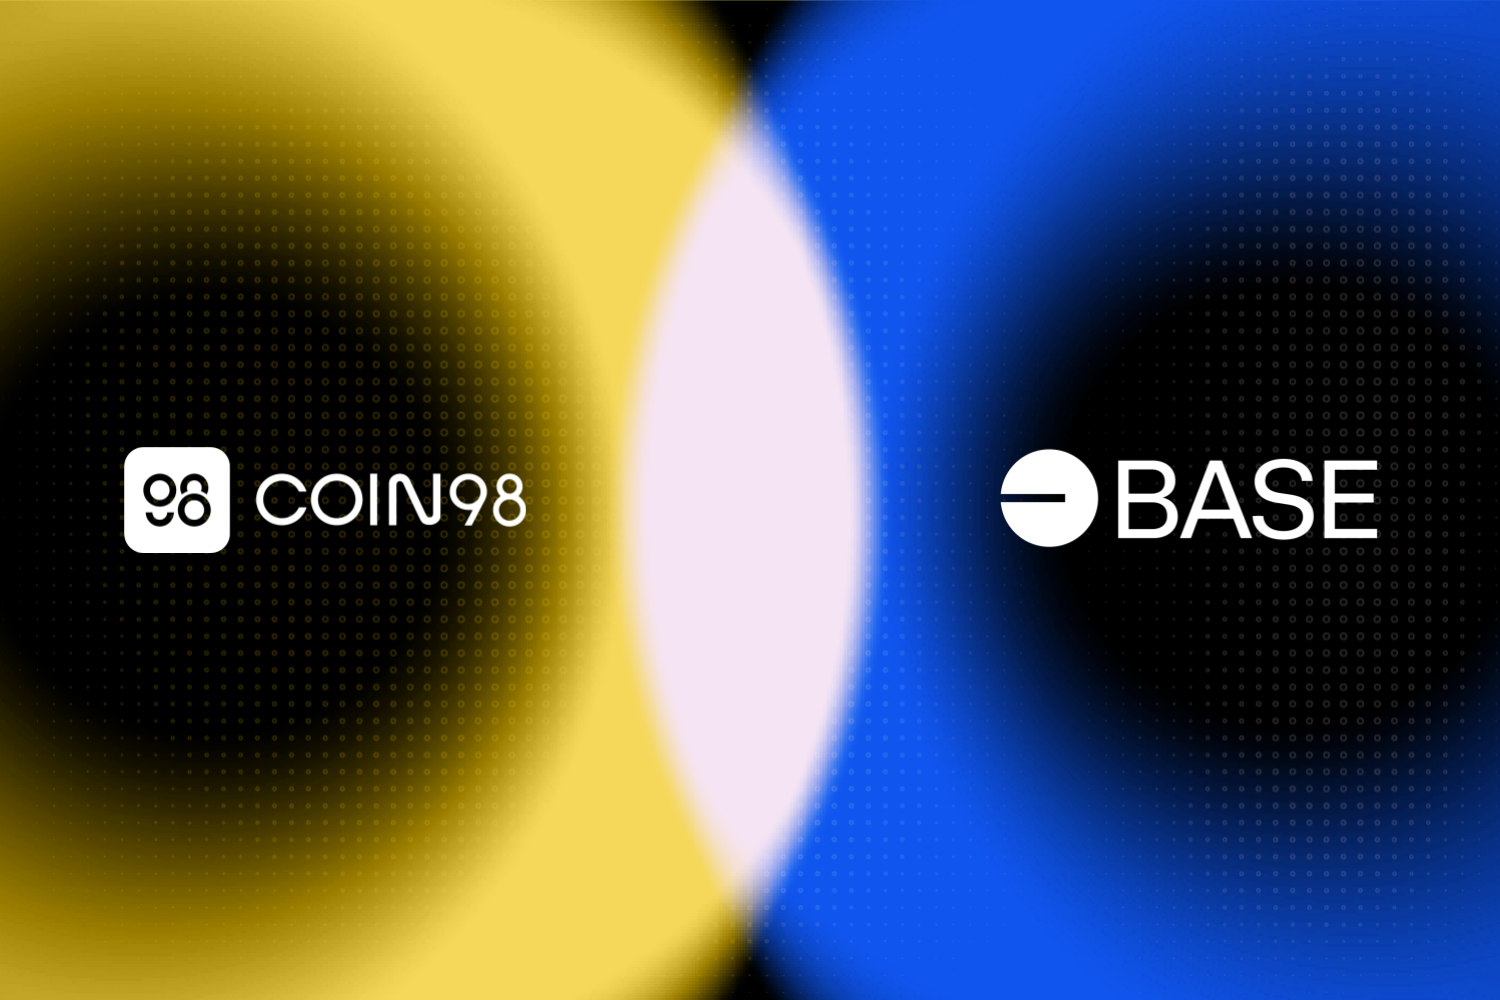 Coin98 supercharges its multichain wallet by integrating Base for better Layer 2 solutions